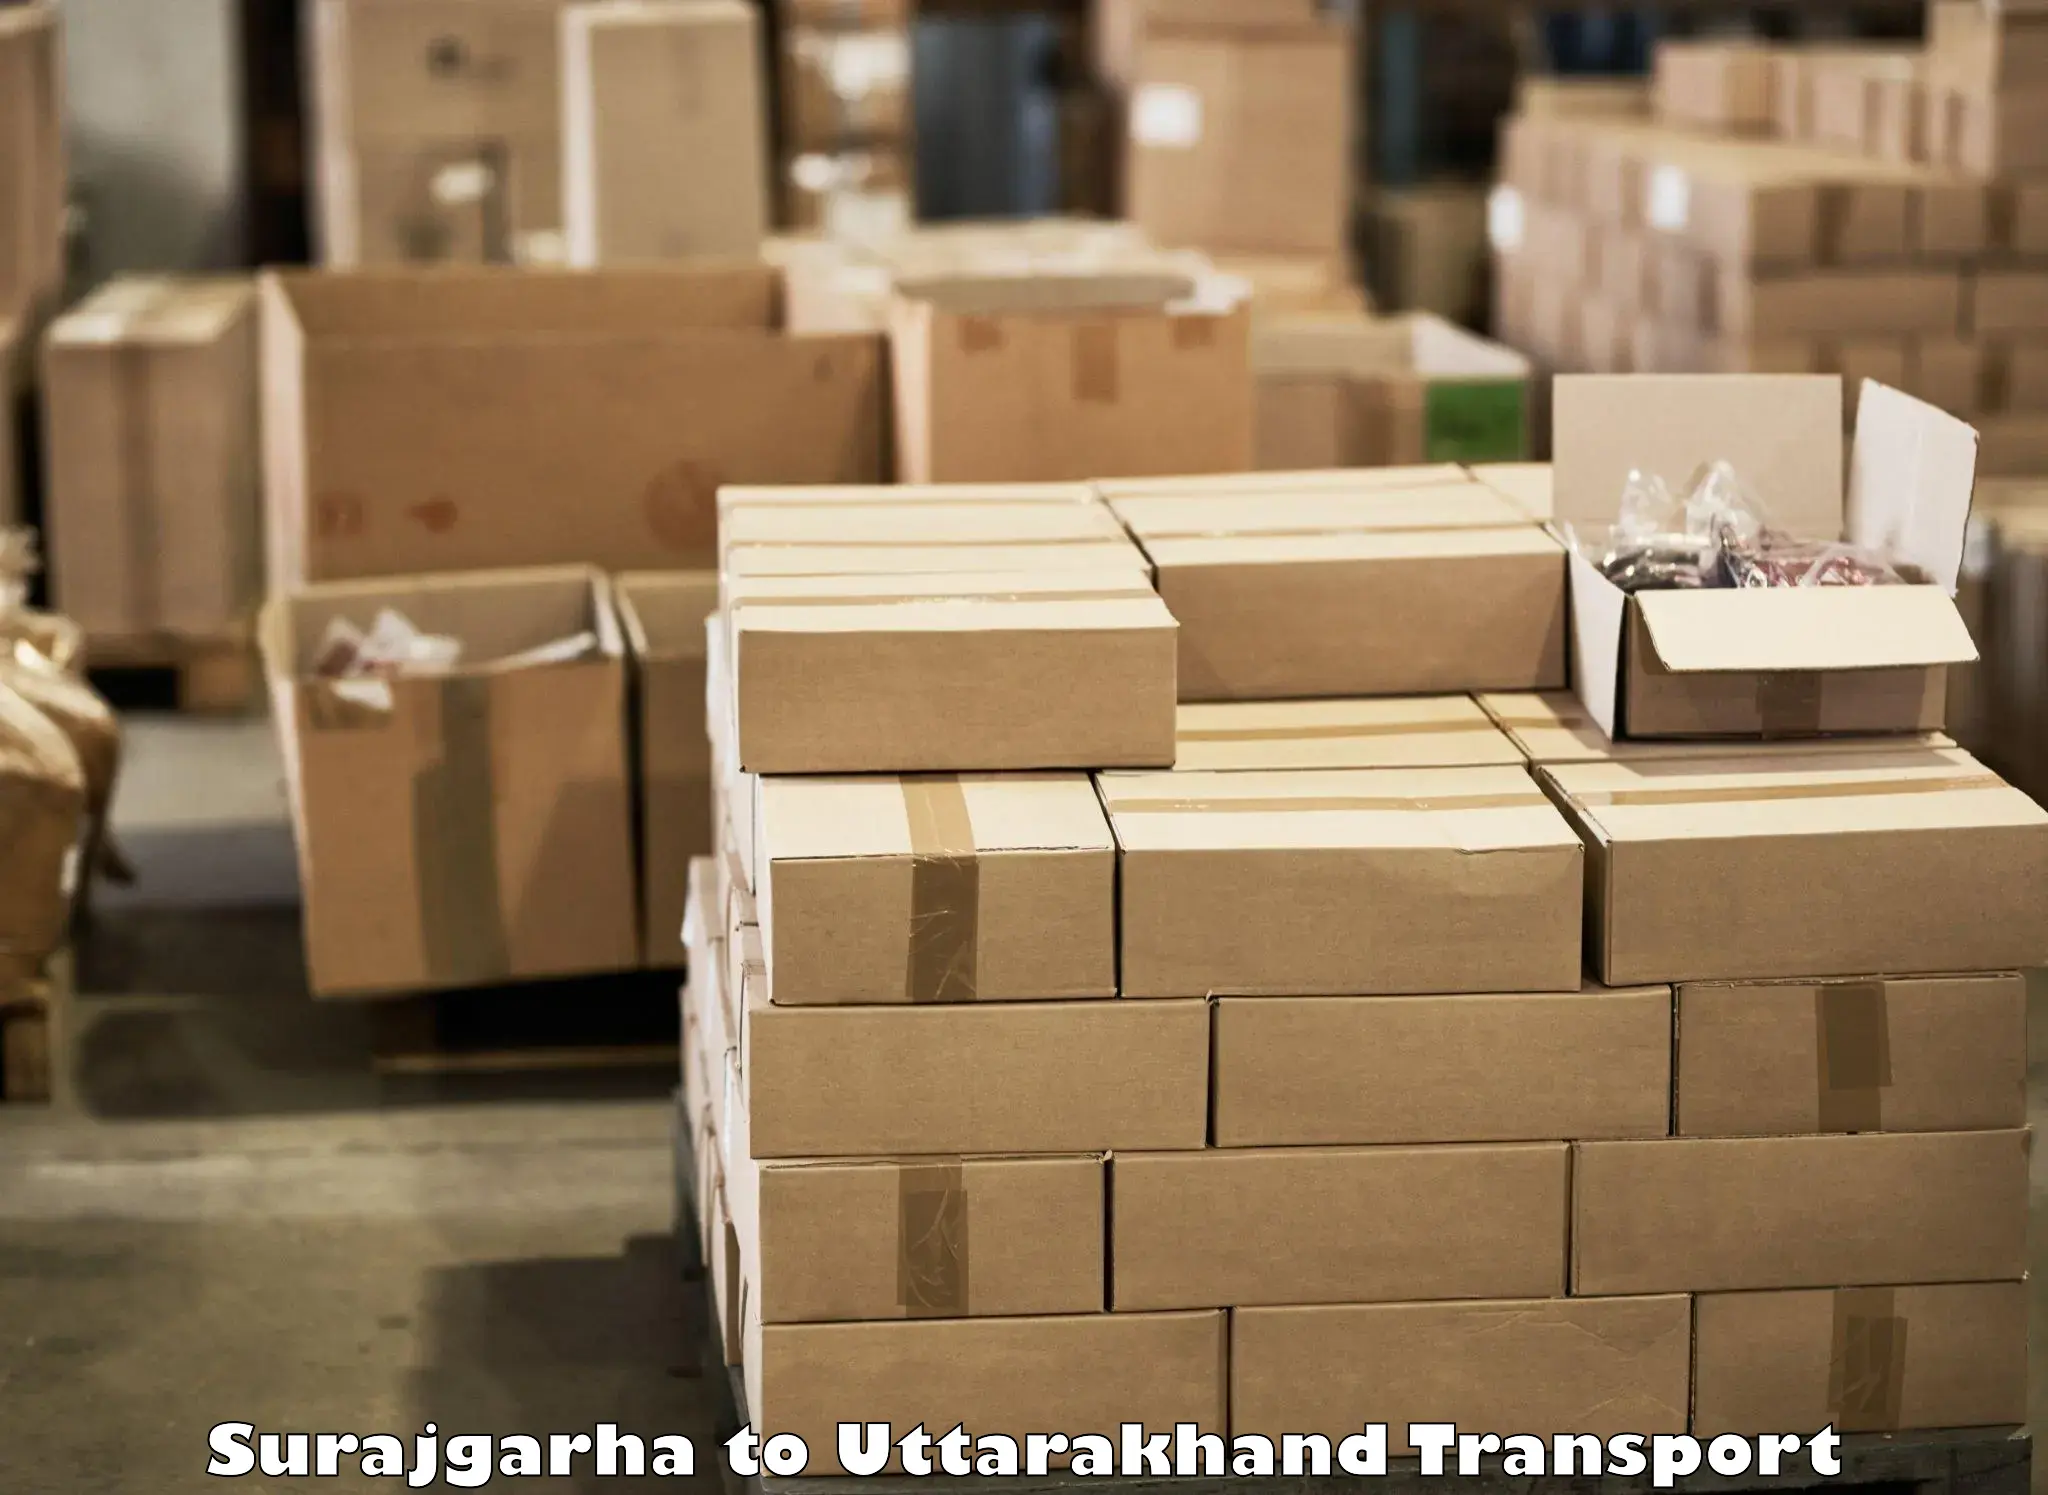 Container transportation services Surajgarha to Rishikesh